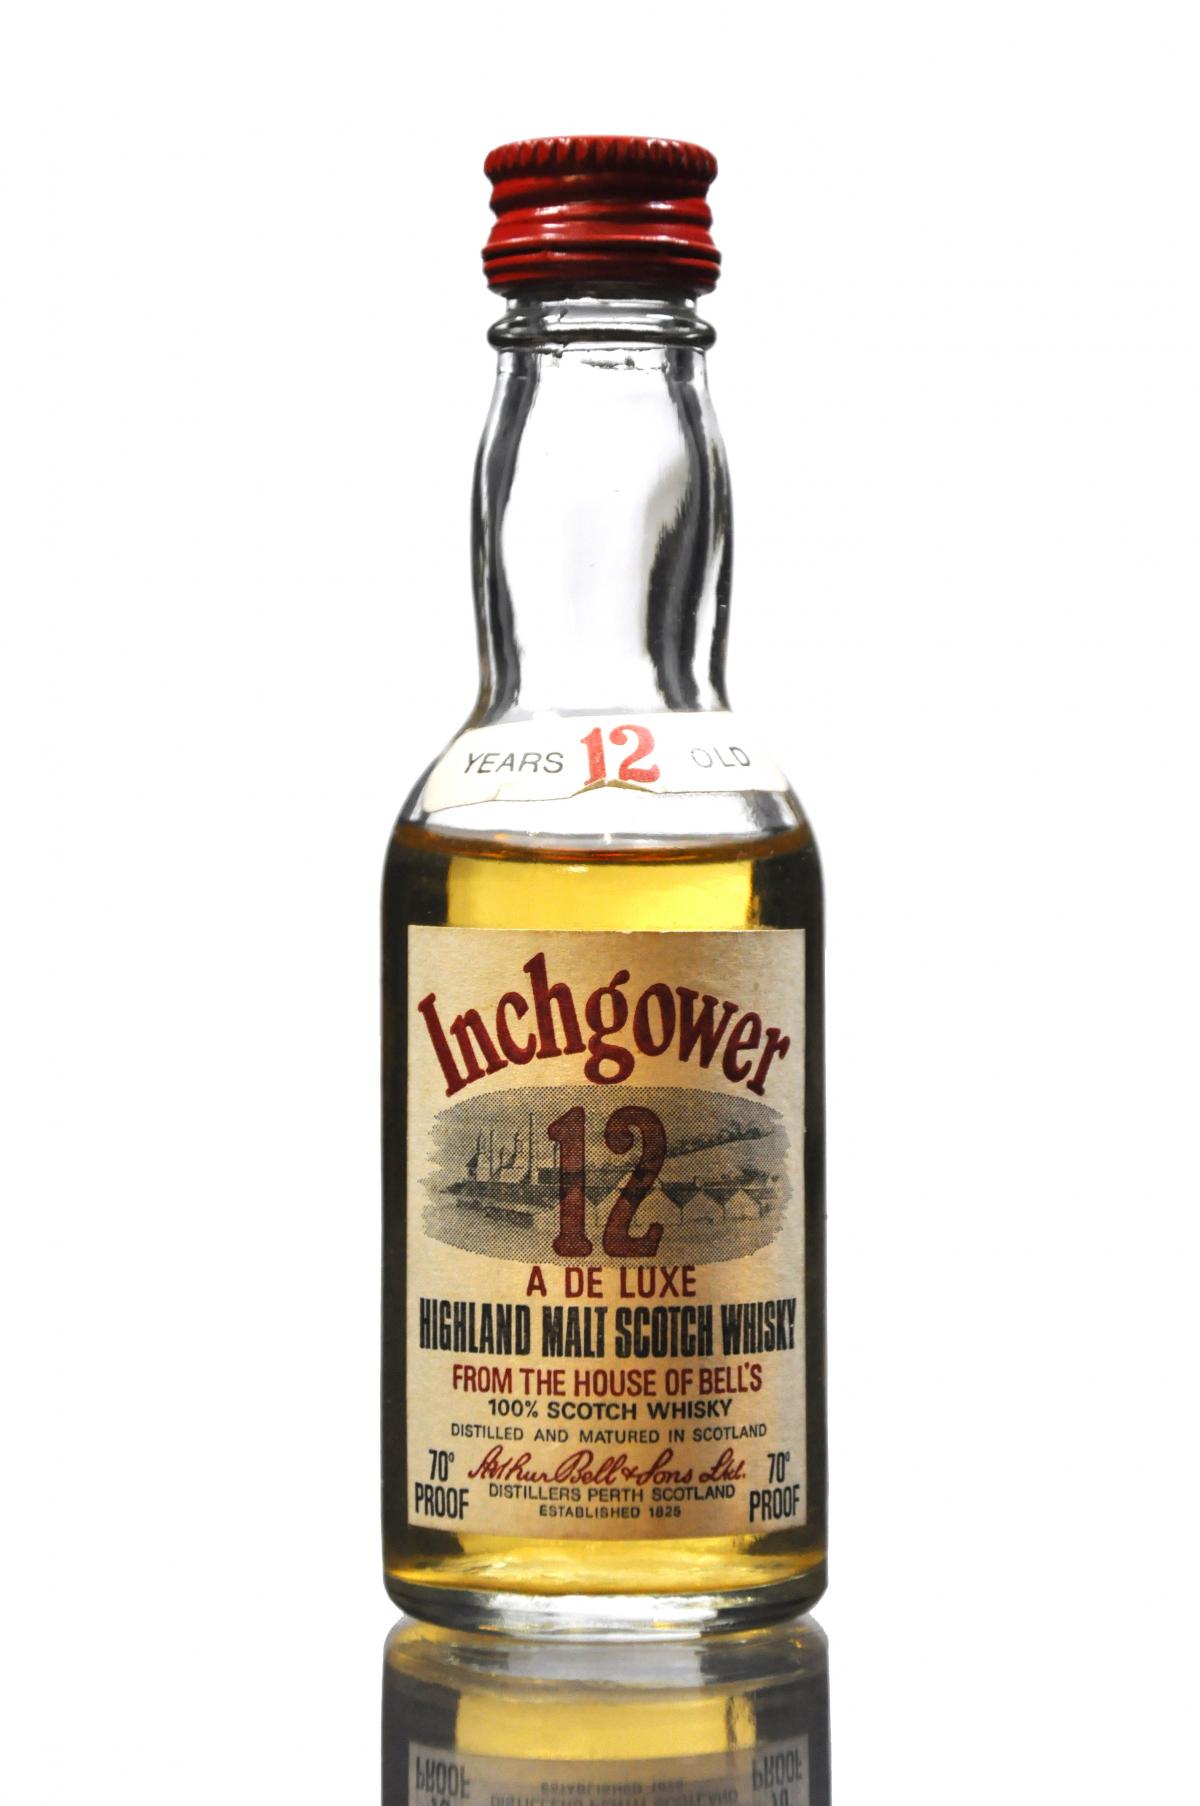 Inchgower 12 Year Old - 70 Proof Miniature